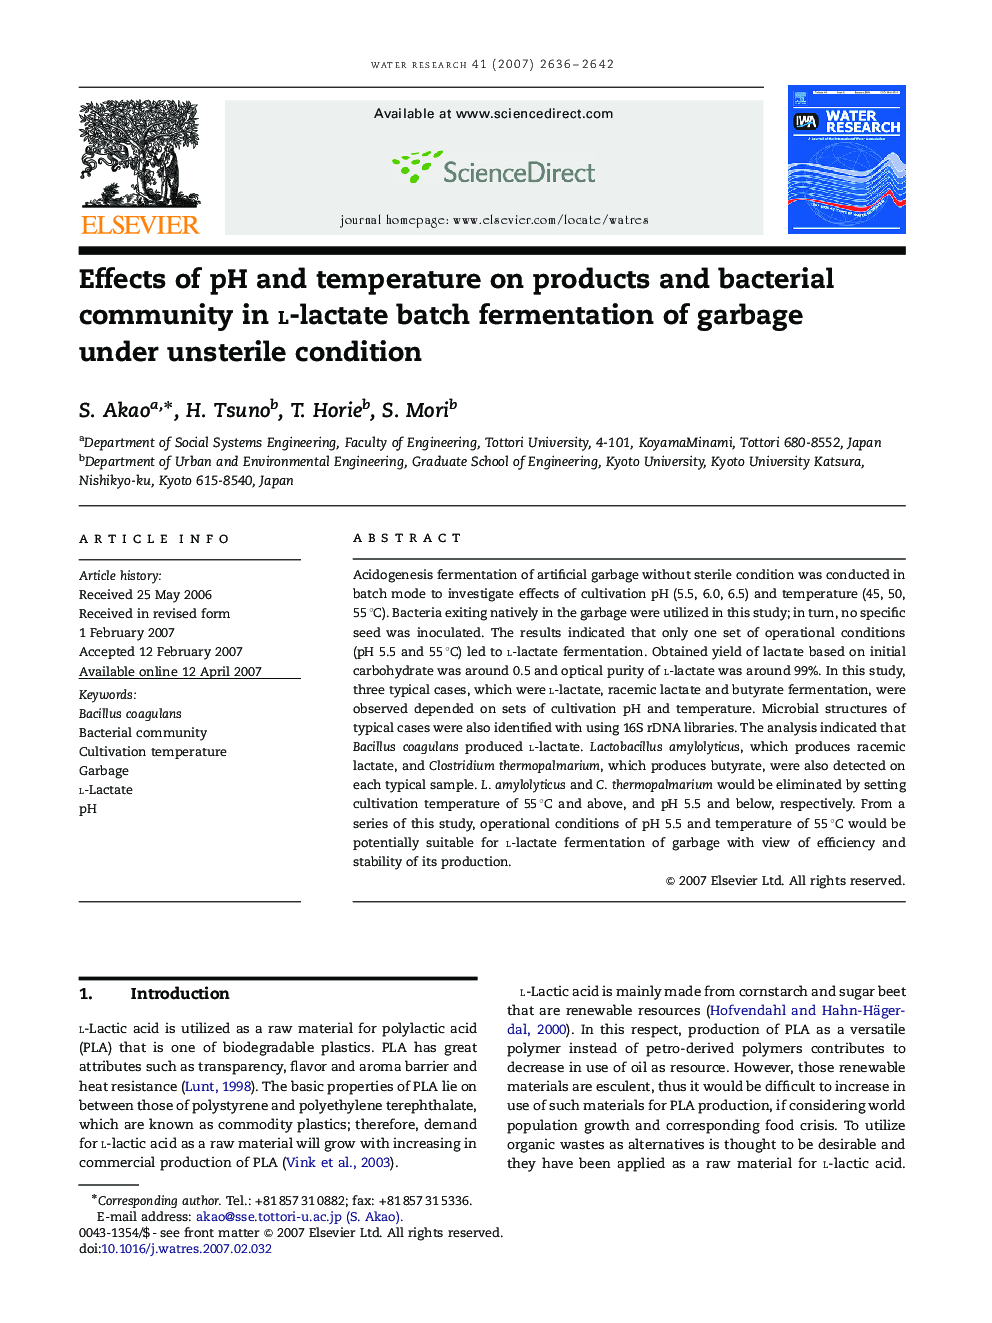 Effects of pH and temperature on products and bacterial community in l-lactate batch fermentation of garbage under unsterile condition